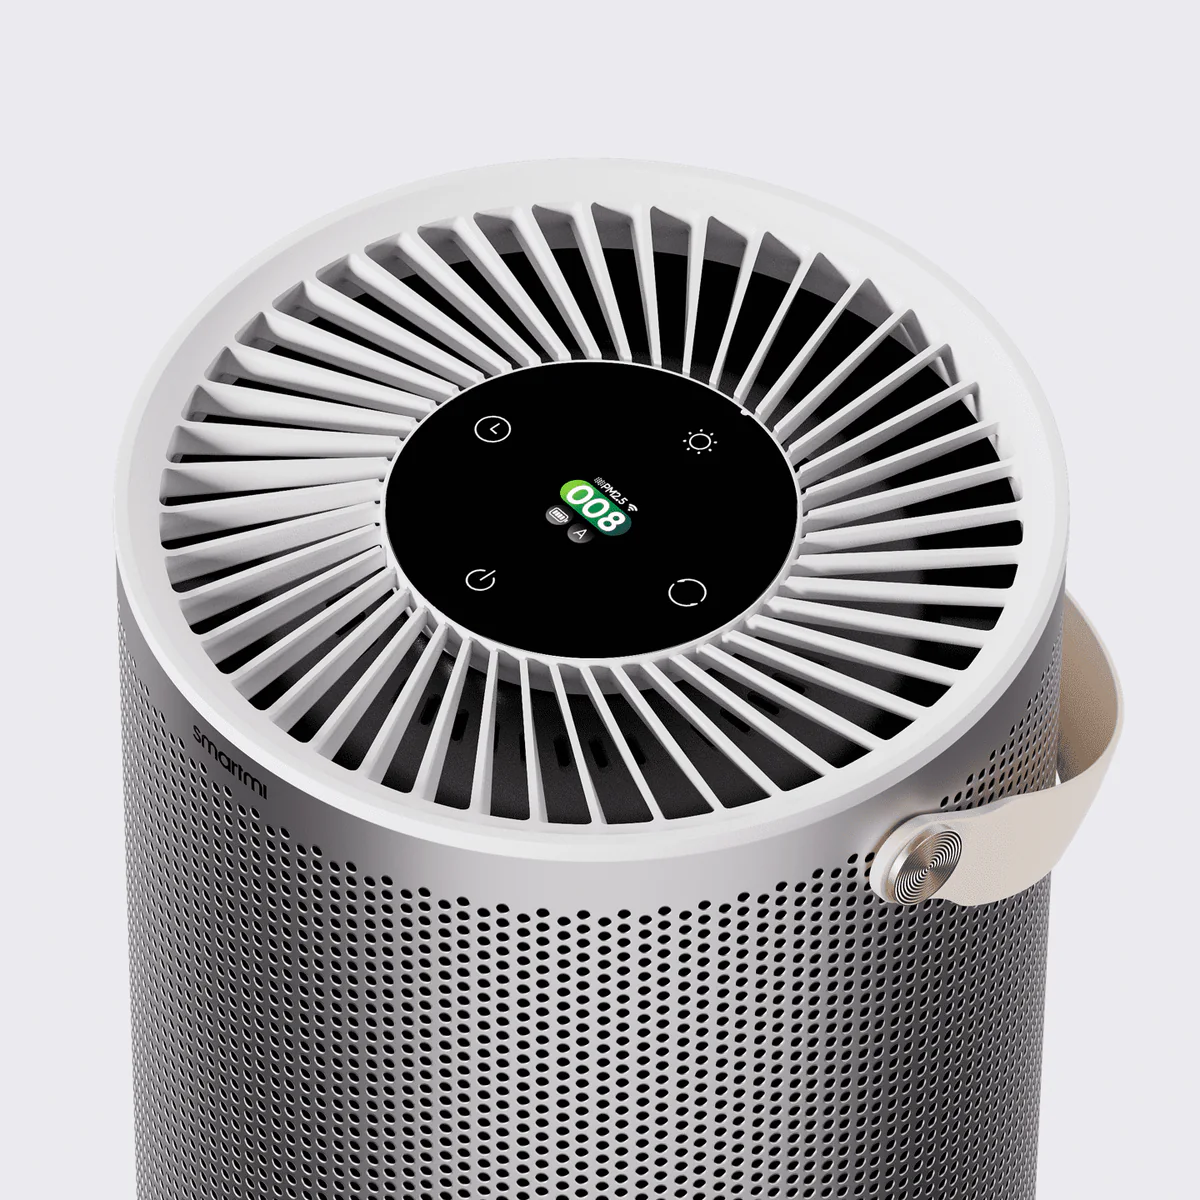 top view of the air purifier